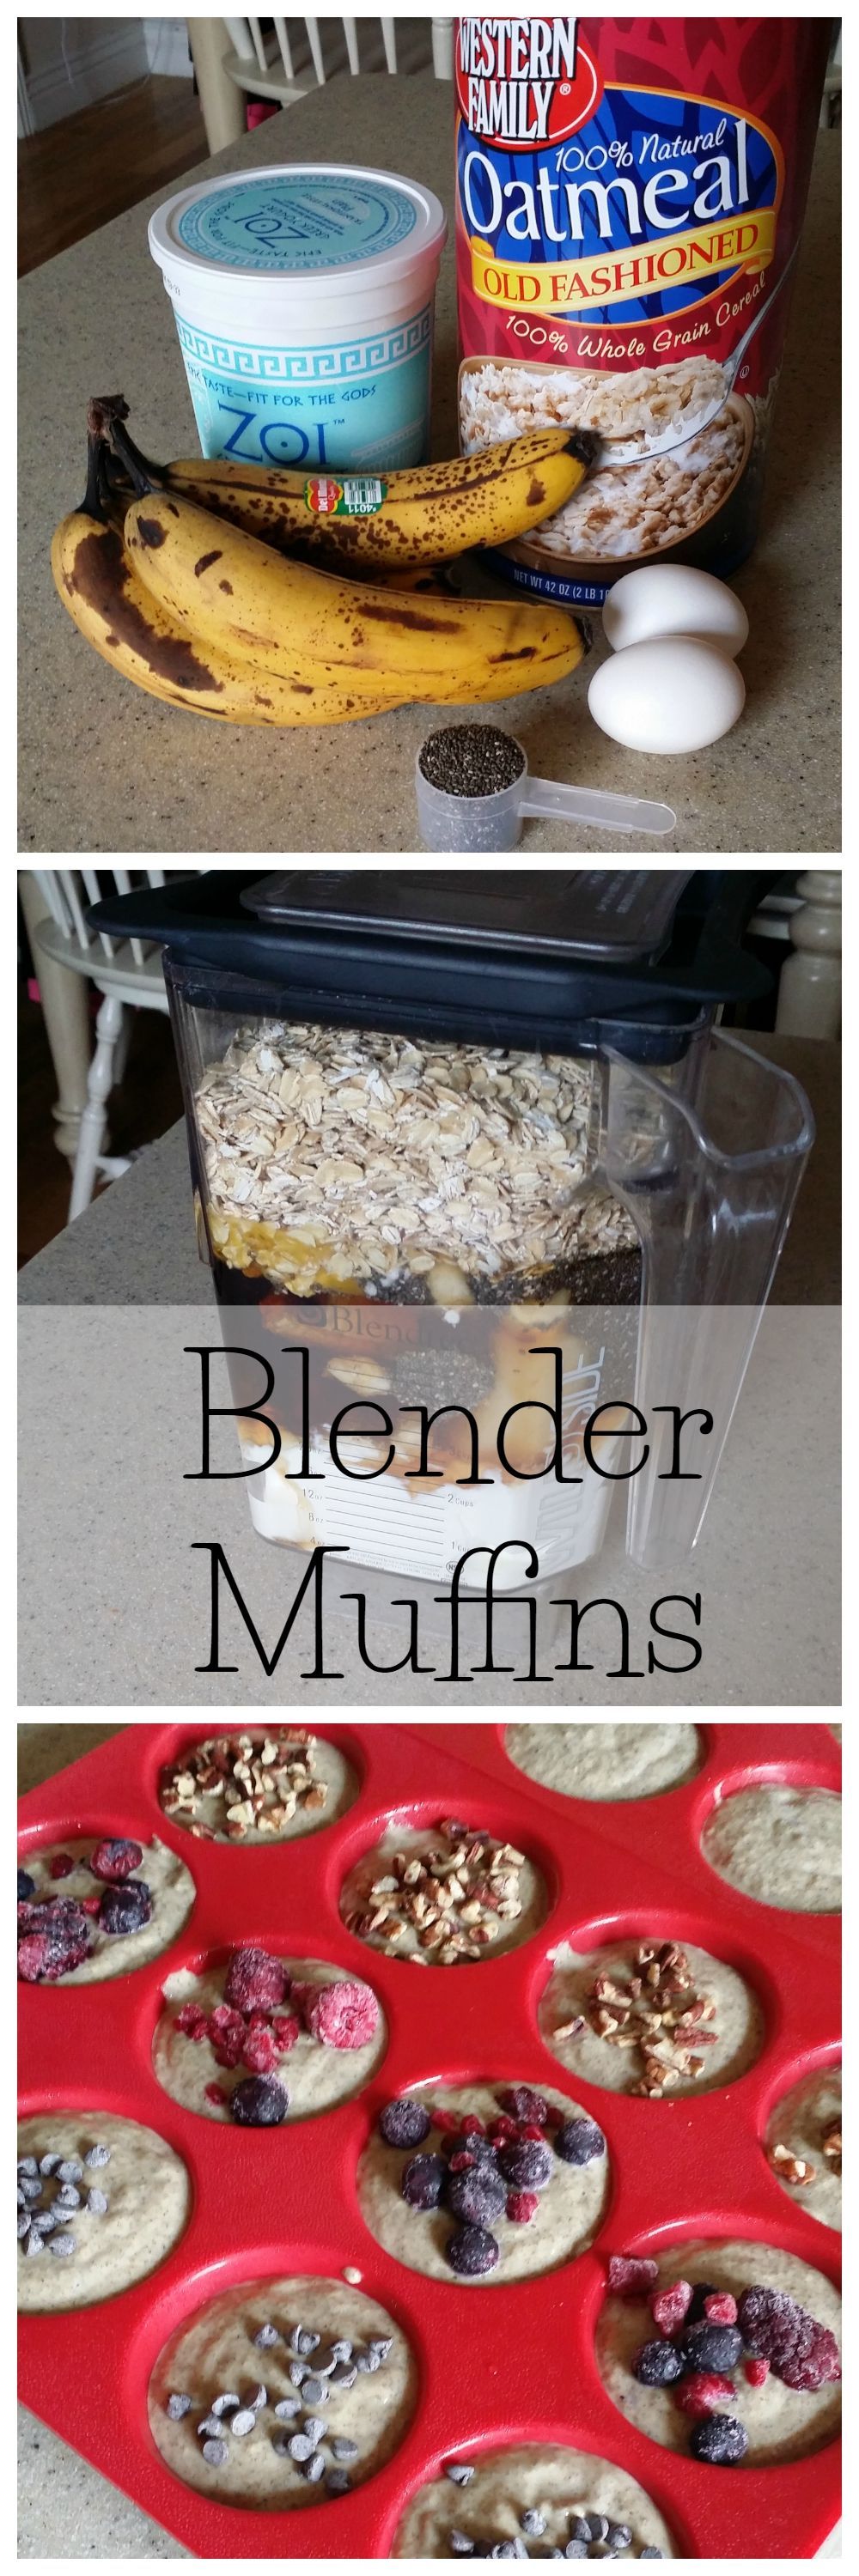 21 Day Fix approved Blender Muffins.  Super easy recipe!